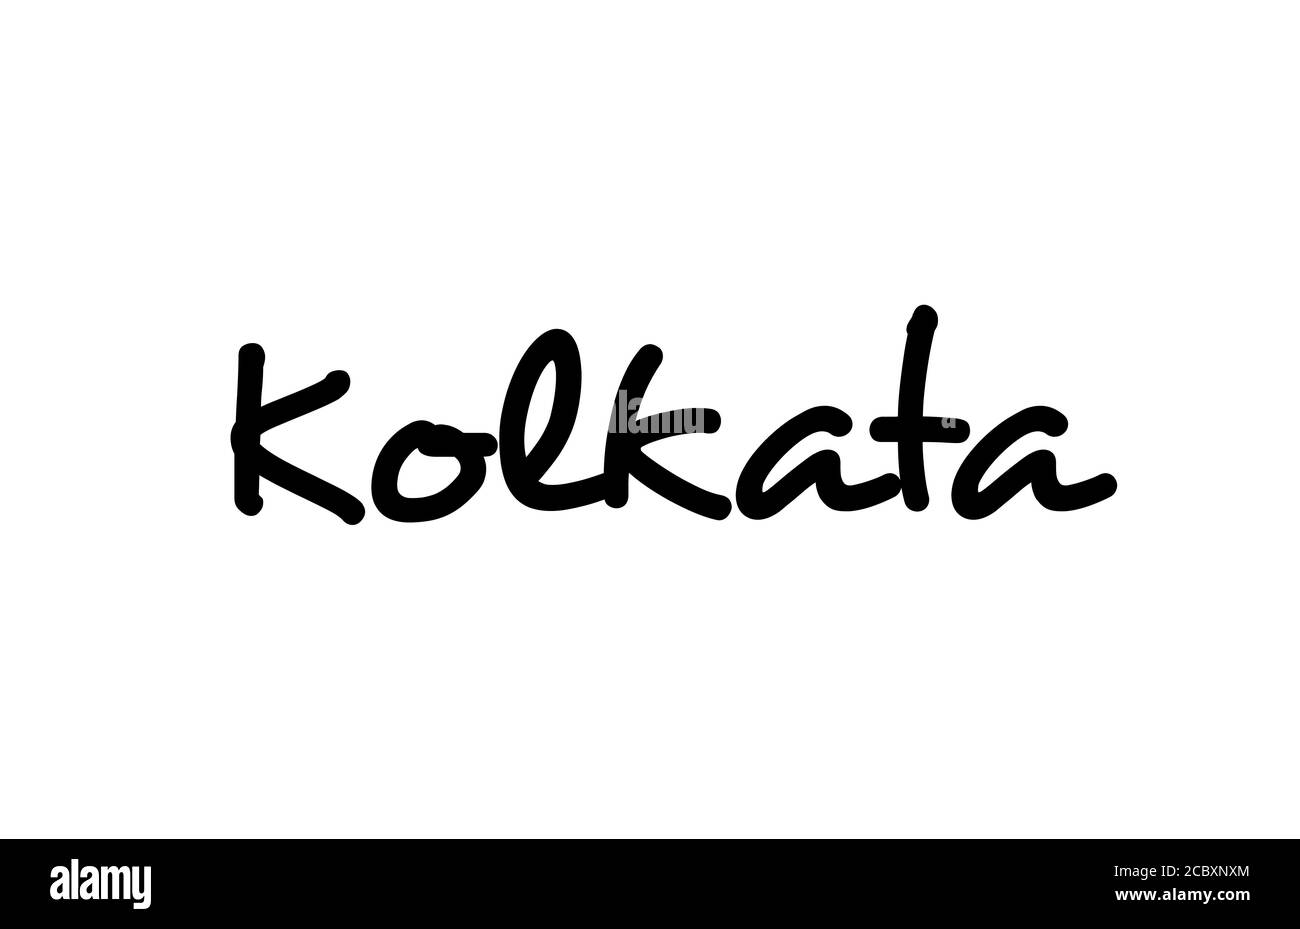 Kolkata city handwritten text word hand lettering. Calligraphy text. Typography in black color Stock Vector